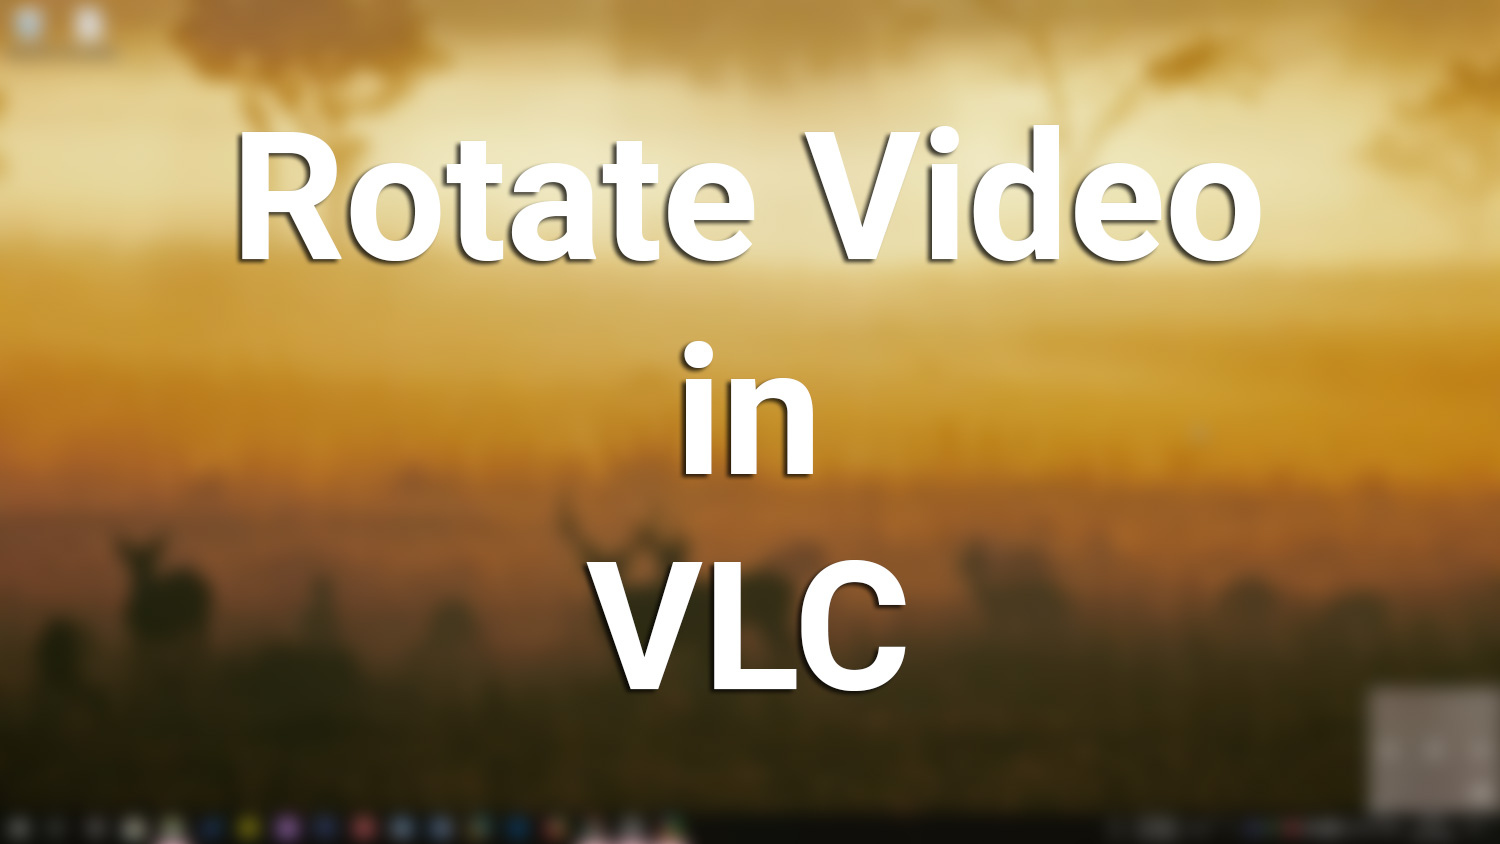 how to rotate video in vlc media player and save